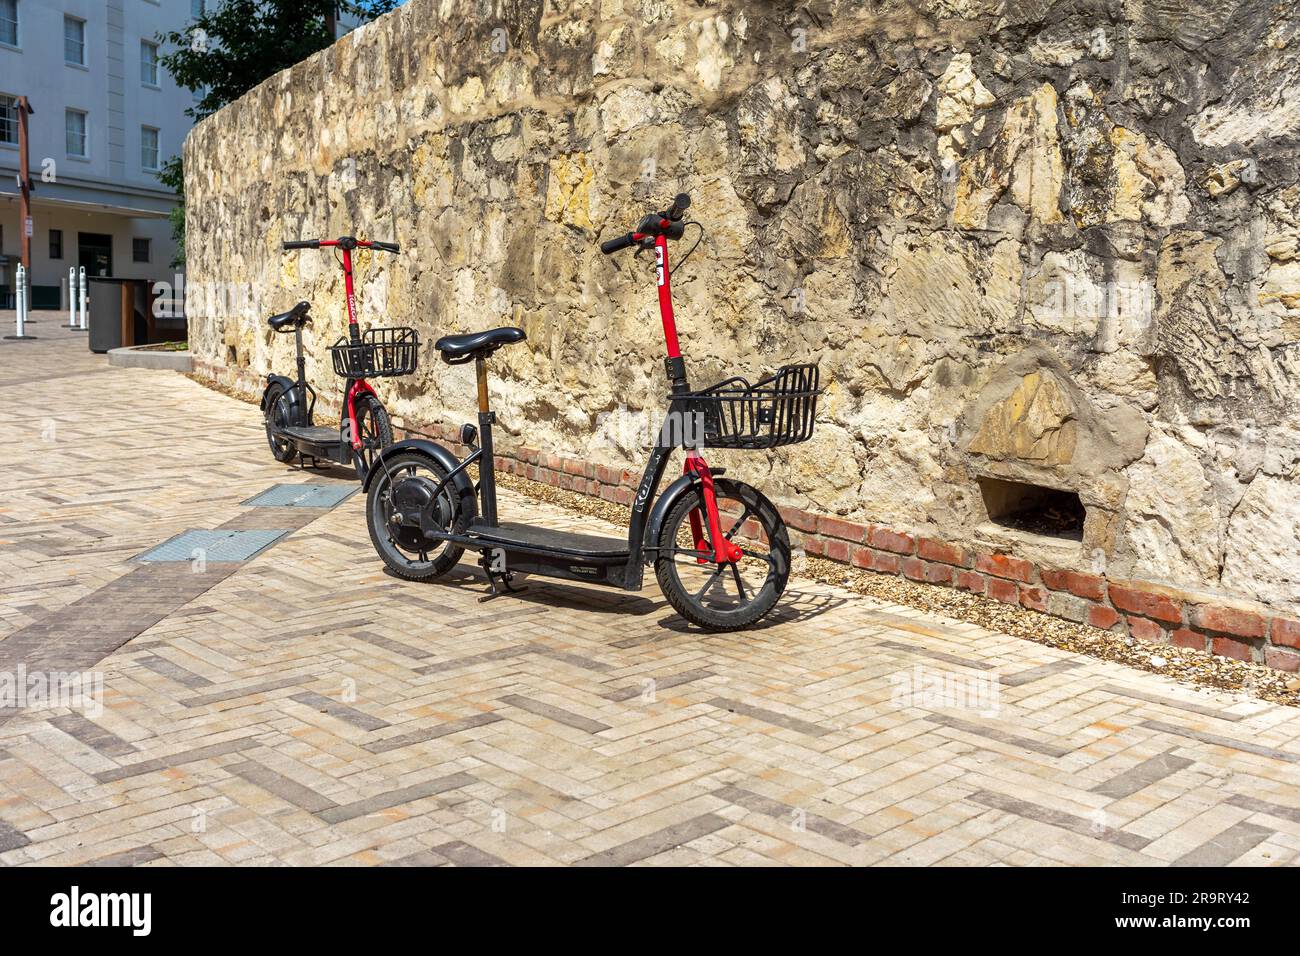 San Antonio, Texas, USA – May 8, 2023: A Razor electric ride share scooters with a seat and basket parked on a sidewalk in downtown San Antonio, Texas Stock Photo